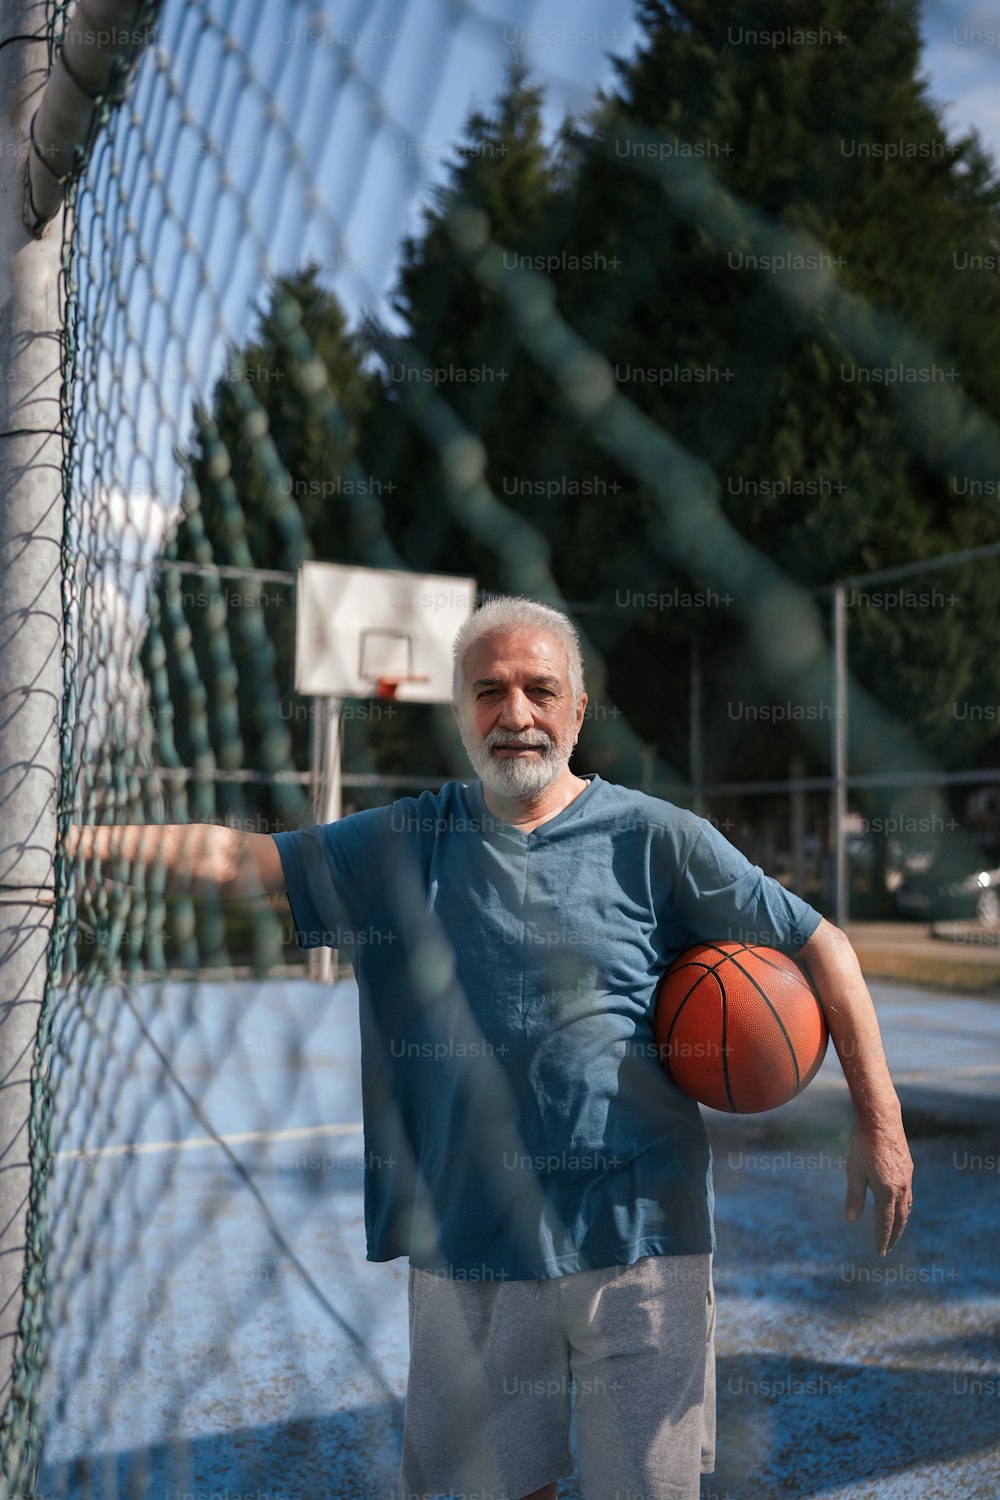 a man holding a basketball standing next to a fence